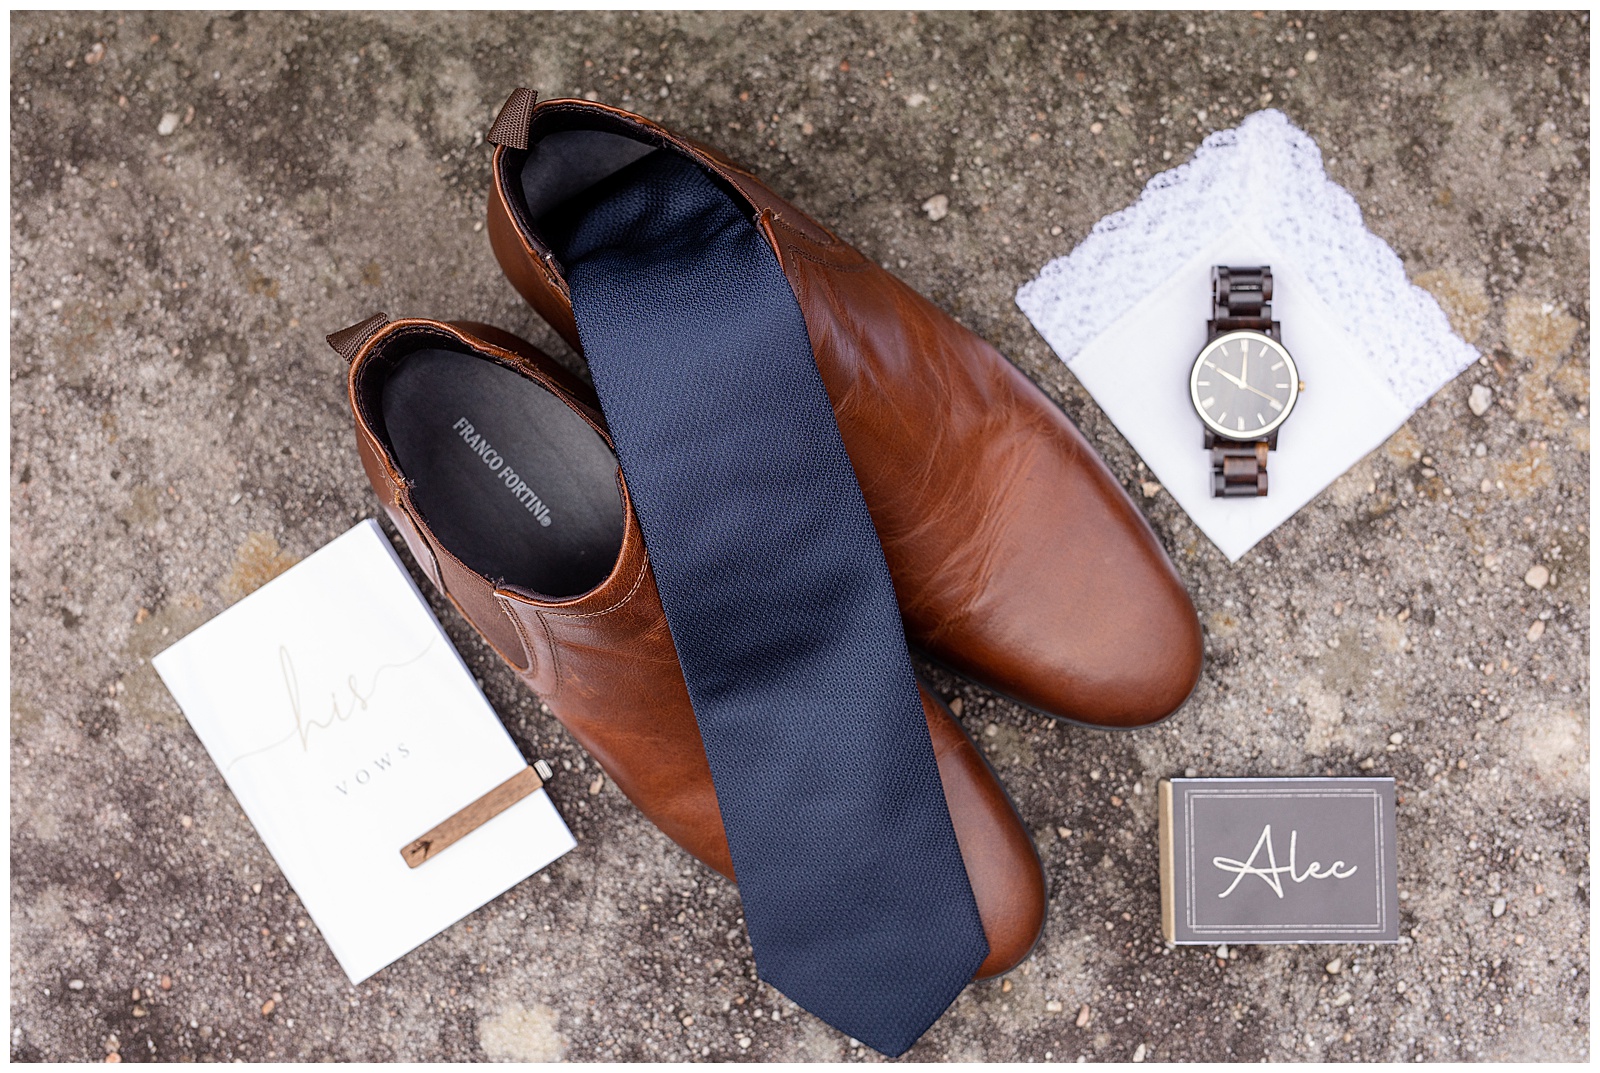 grooms brown shoes displayed with navy blue tie, wrist watch, and other accessories at elizabeth furnace